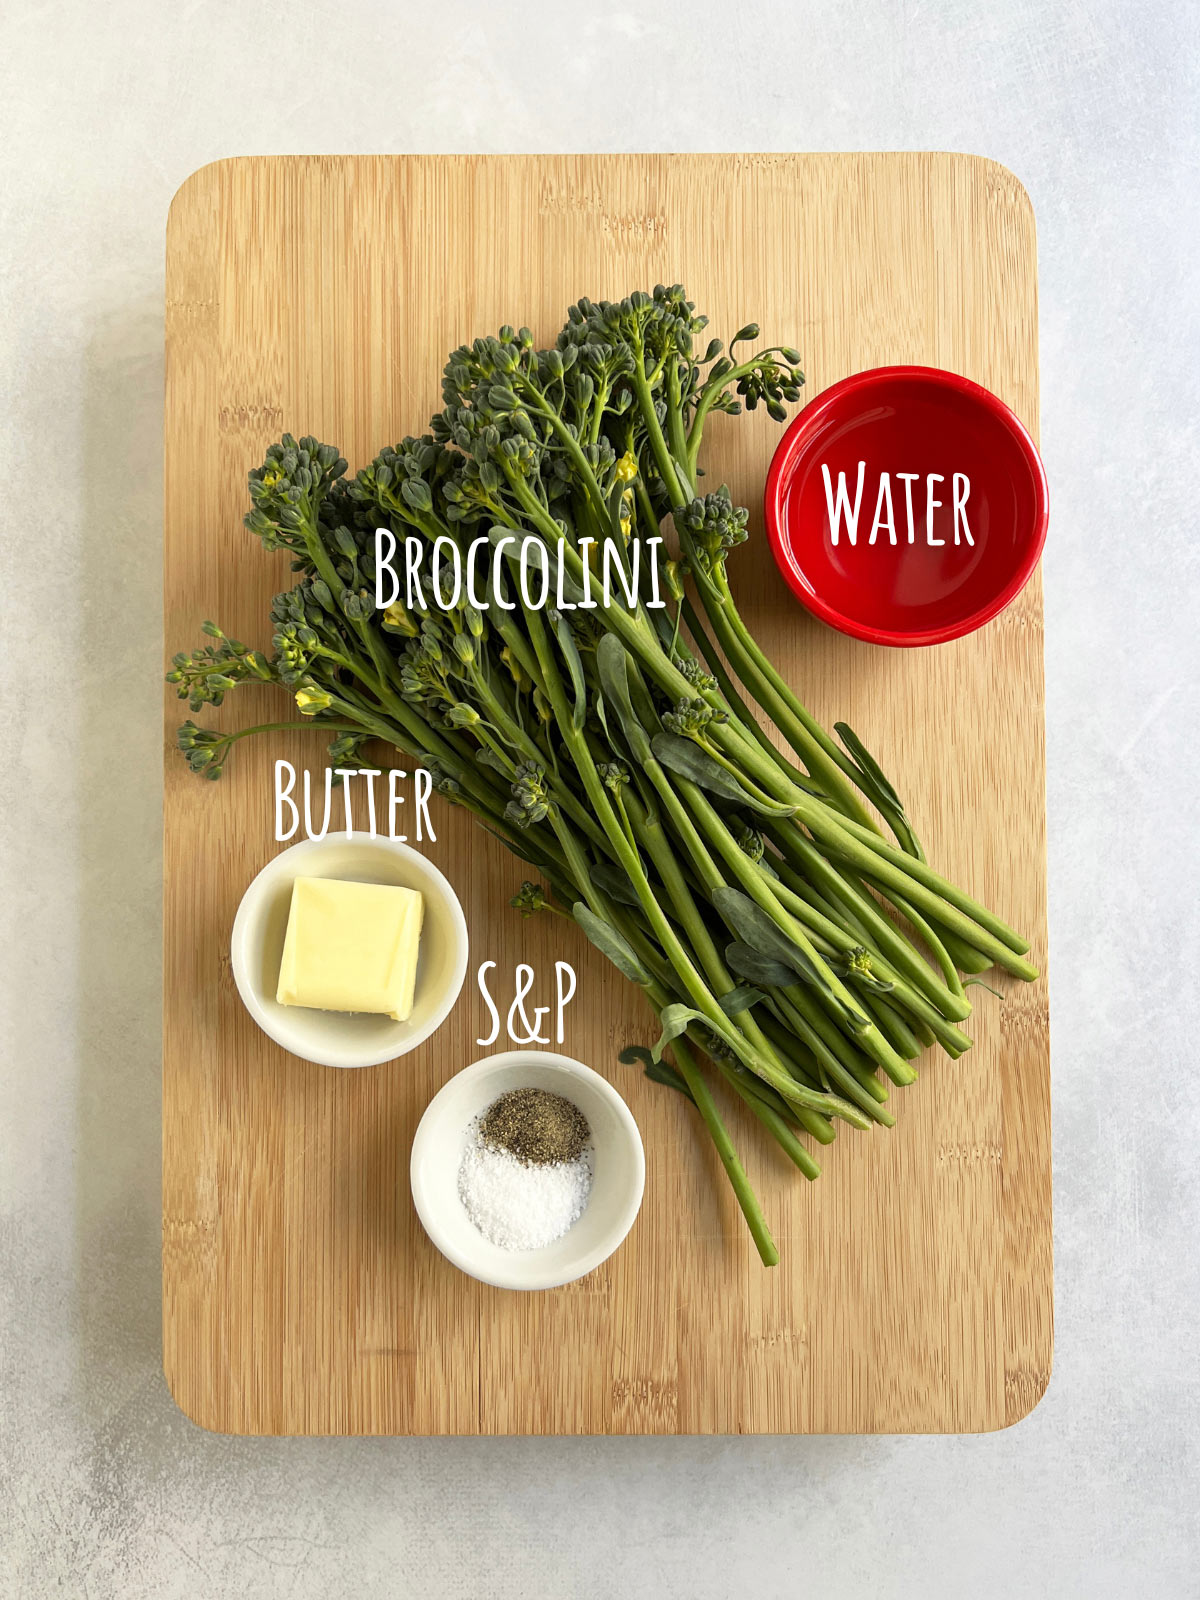 Ingredient shot for braised broccolini with vegetable, butter, salt, pepper, and water on a wooden cutting board.